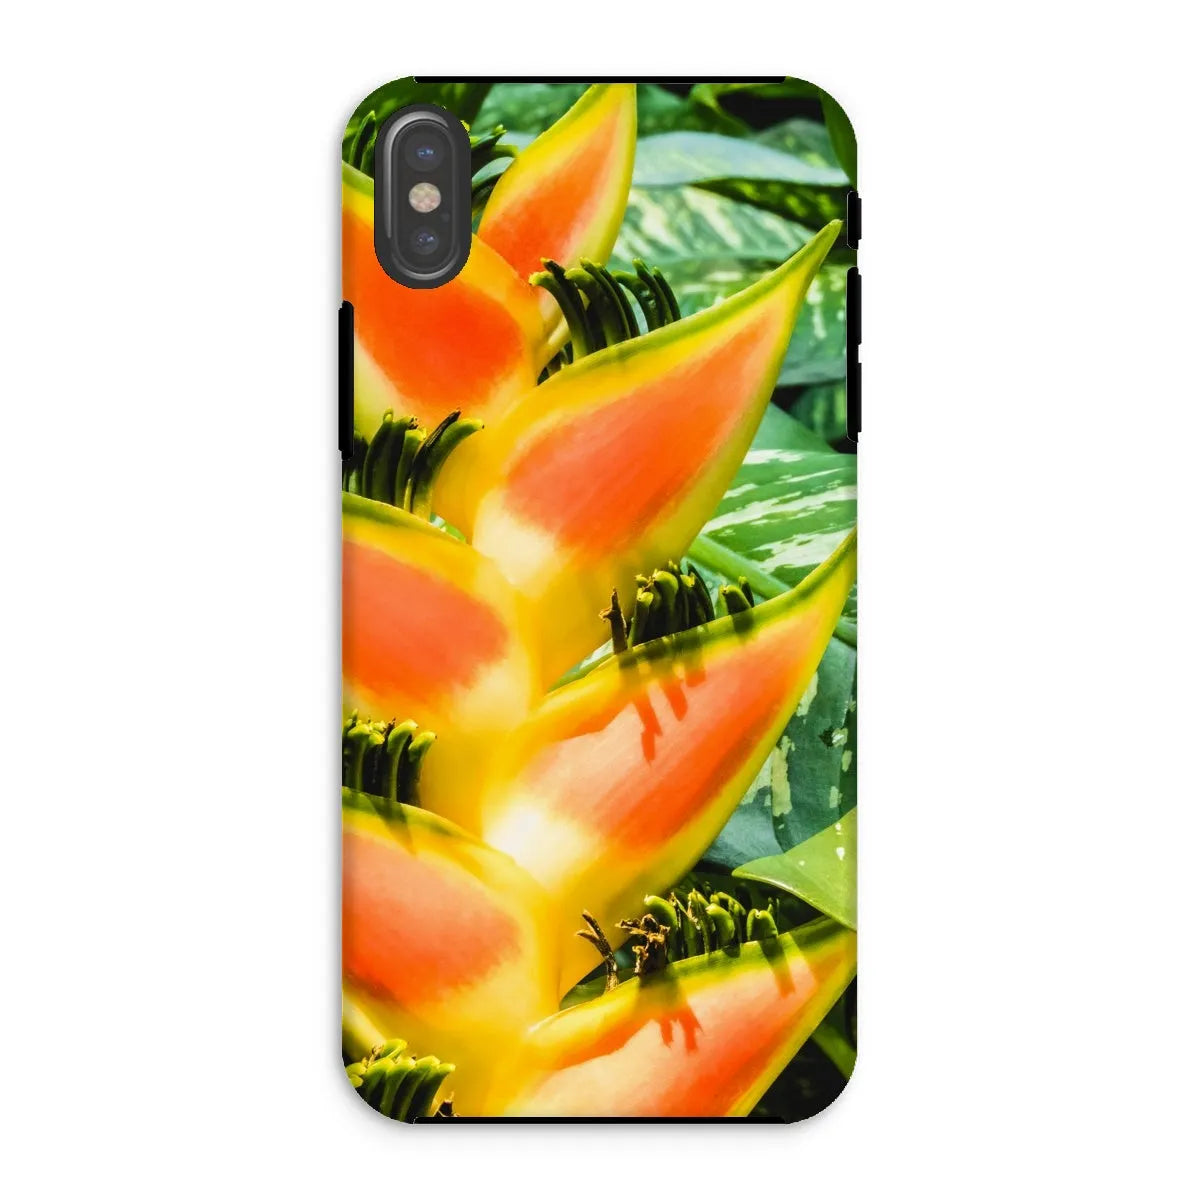 Showstopper Tough Phone Case - Iphone Xs / Matte - Mobile Phone Cases - Aesthetic Art